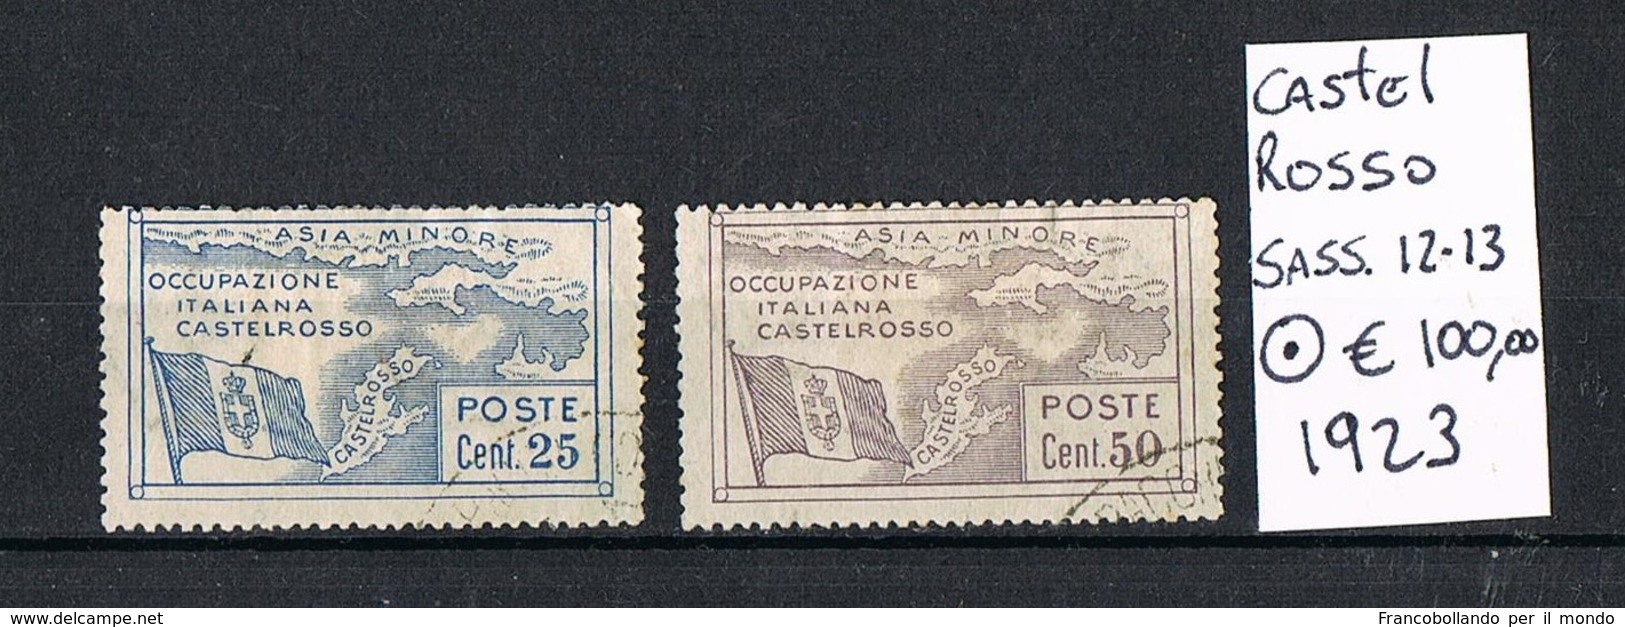 1923 CASTEL ROSSO USED NICE STAMPS SASSONE#12-13 &euro;100,00 - Castelrosso